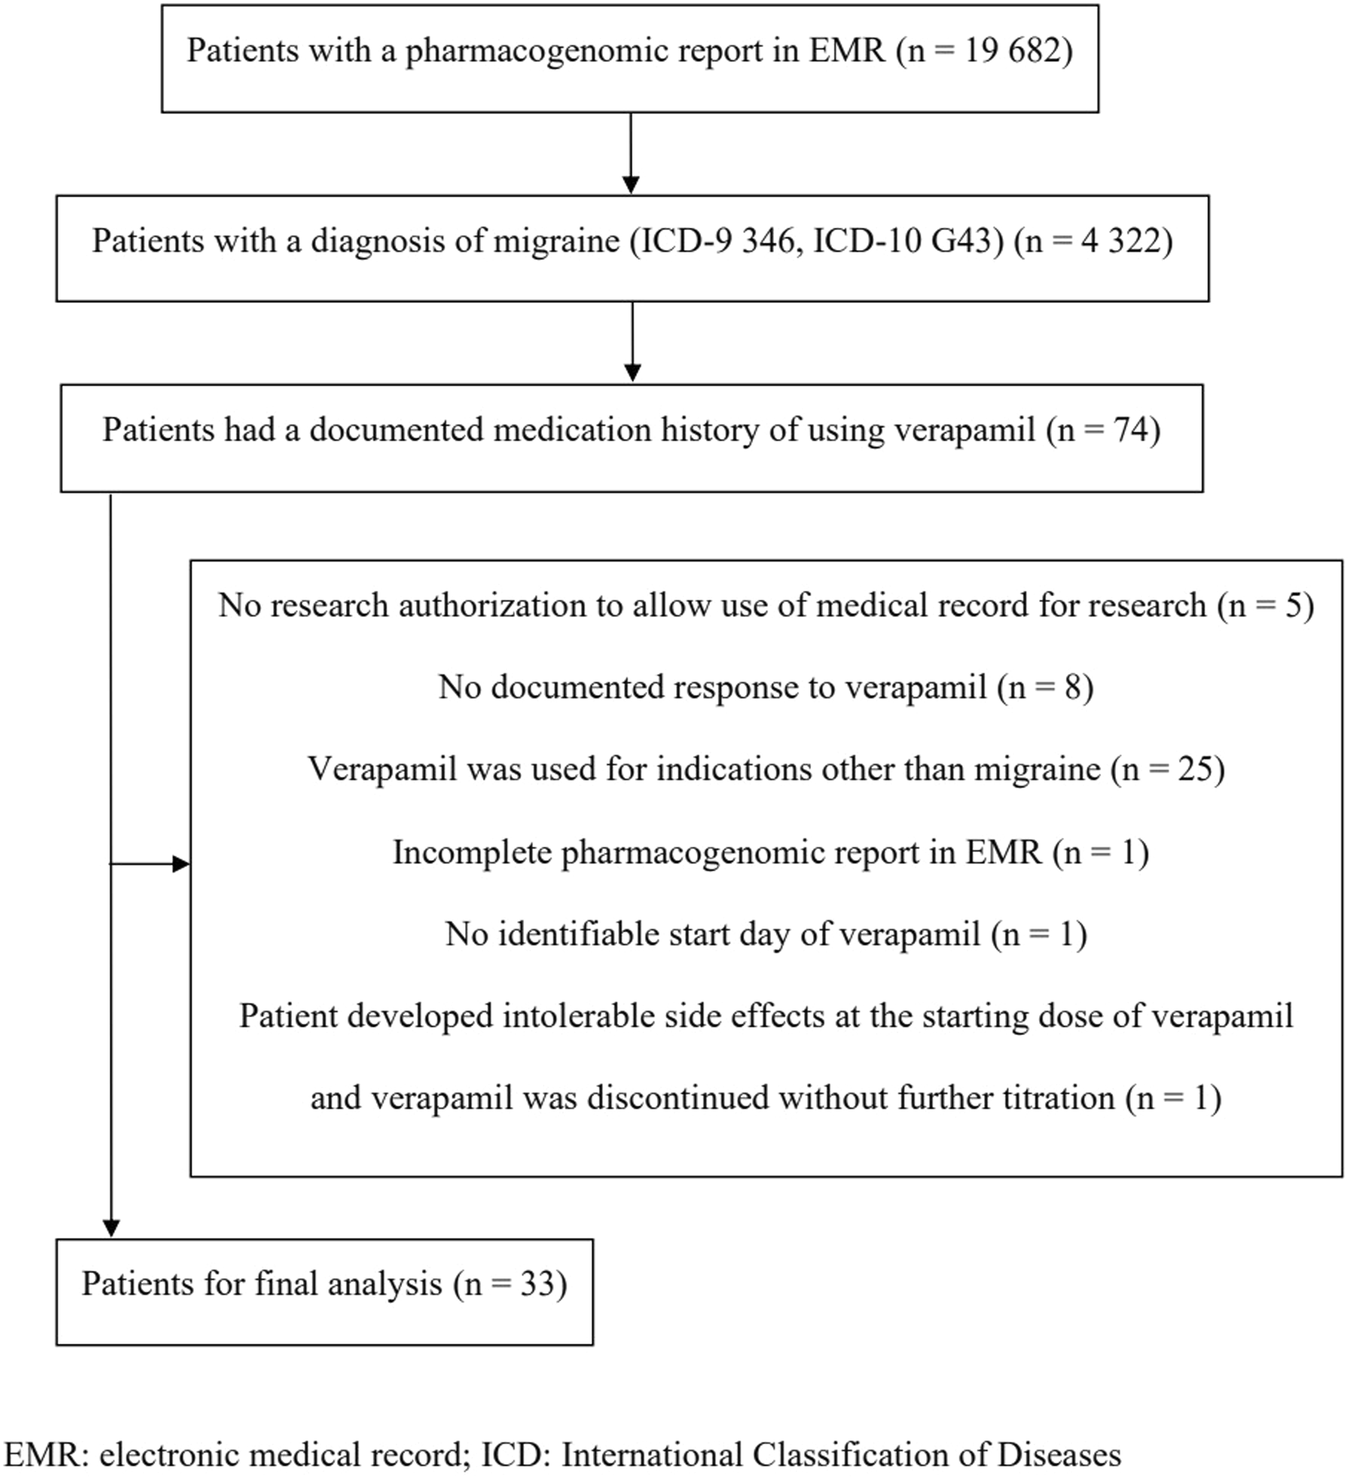 Pharmacogenomic study—A pilot study of the effect of pharmacogenomic phenotypes on the adequate dosing of verapamil for migraine prevention